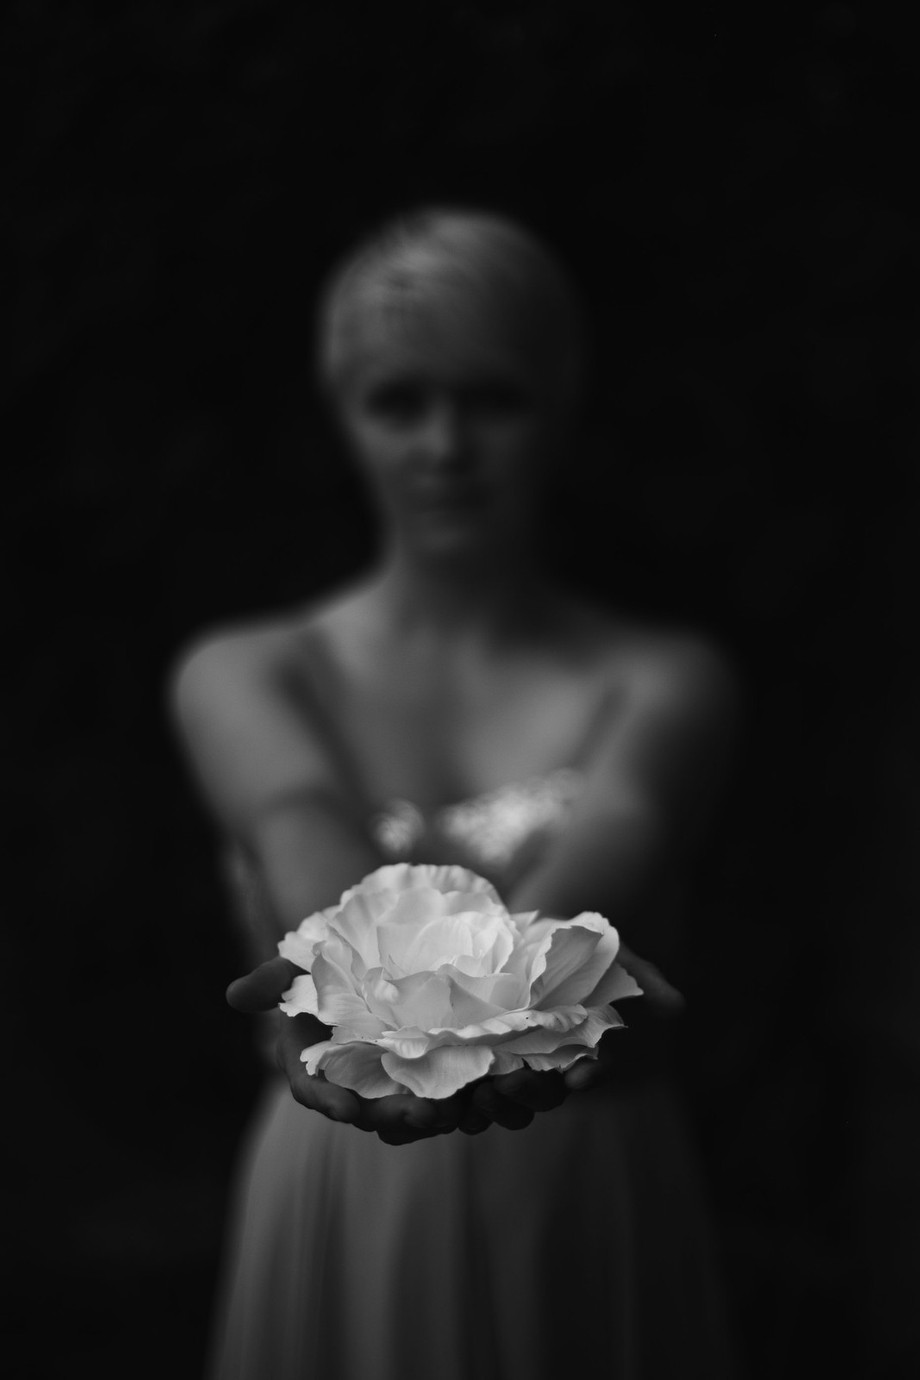 white rose of peace by darcithompson - Blurry Captures Photo Contest